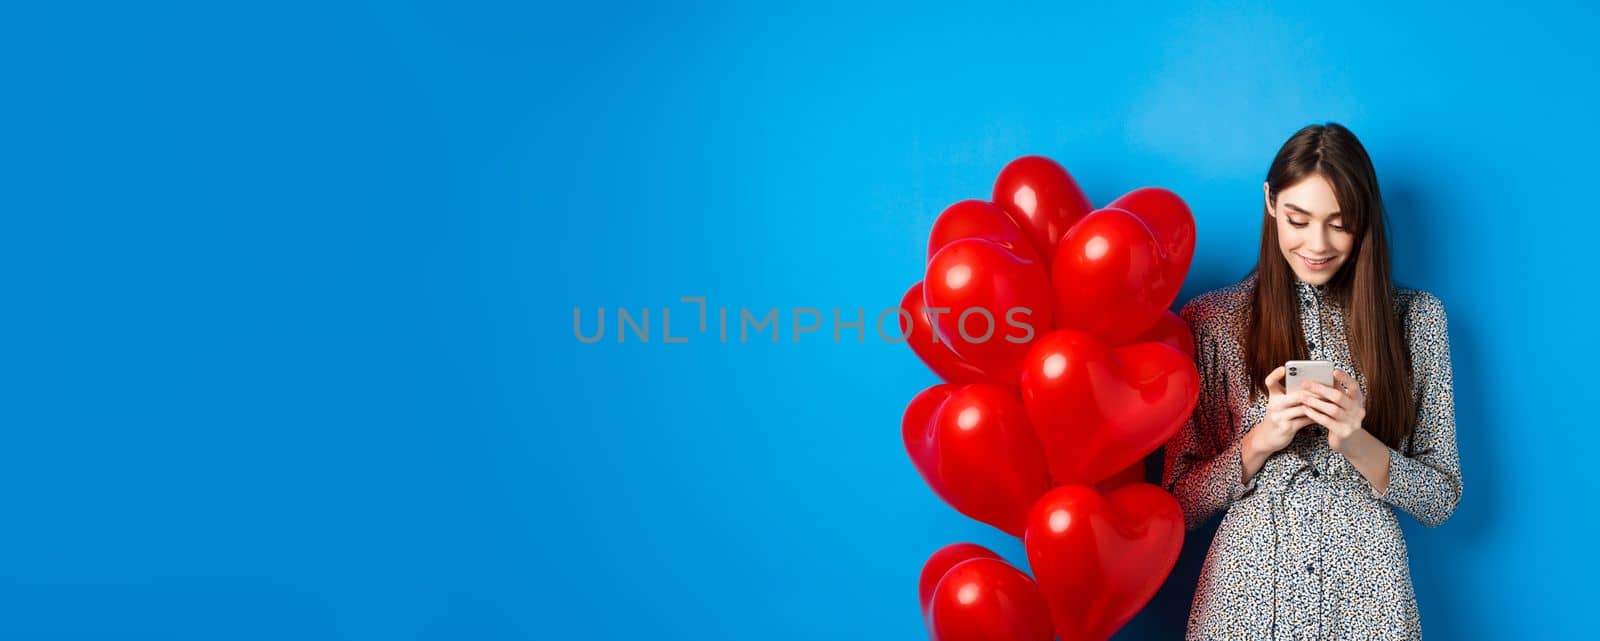 Valentines day. Smiling woman in dress standing near red hearts balloons and looking at smartphone, standing on blue background by Benzoix